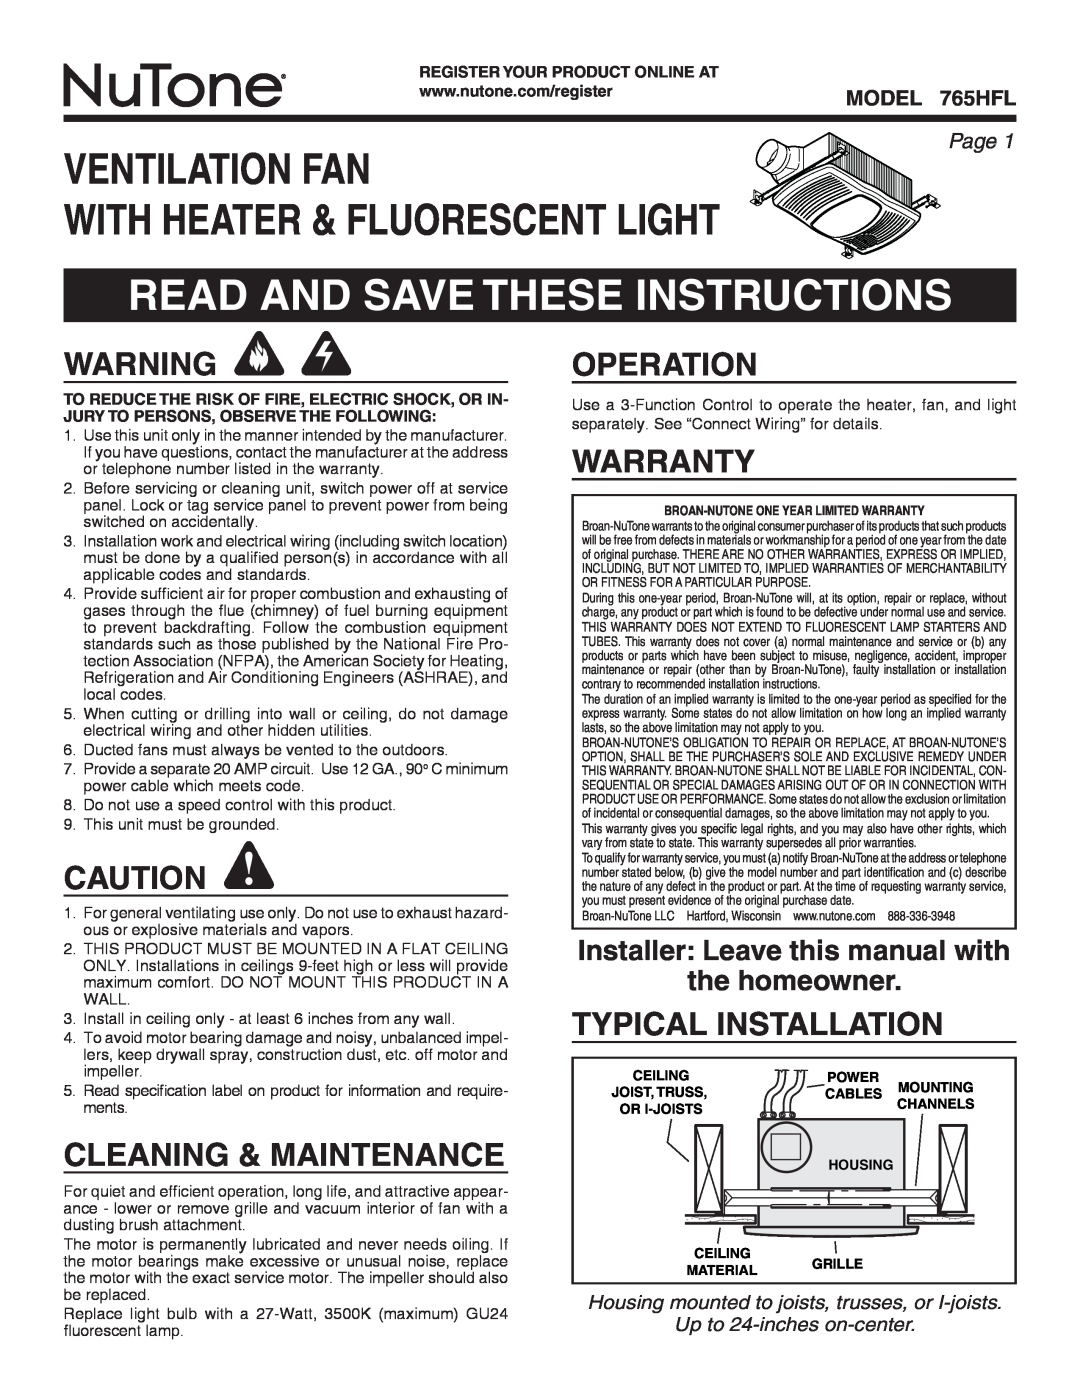 NuTone 765HFL warranty Ventilation Fan With Heater & Fluorescent Light, Read And Save These Instructions, Operation 